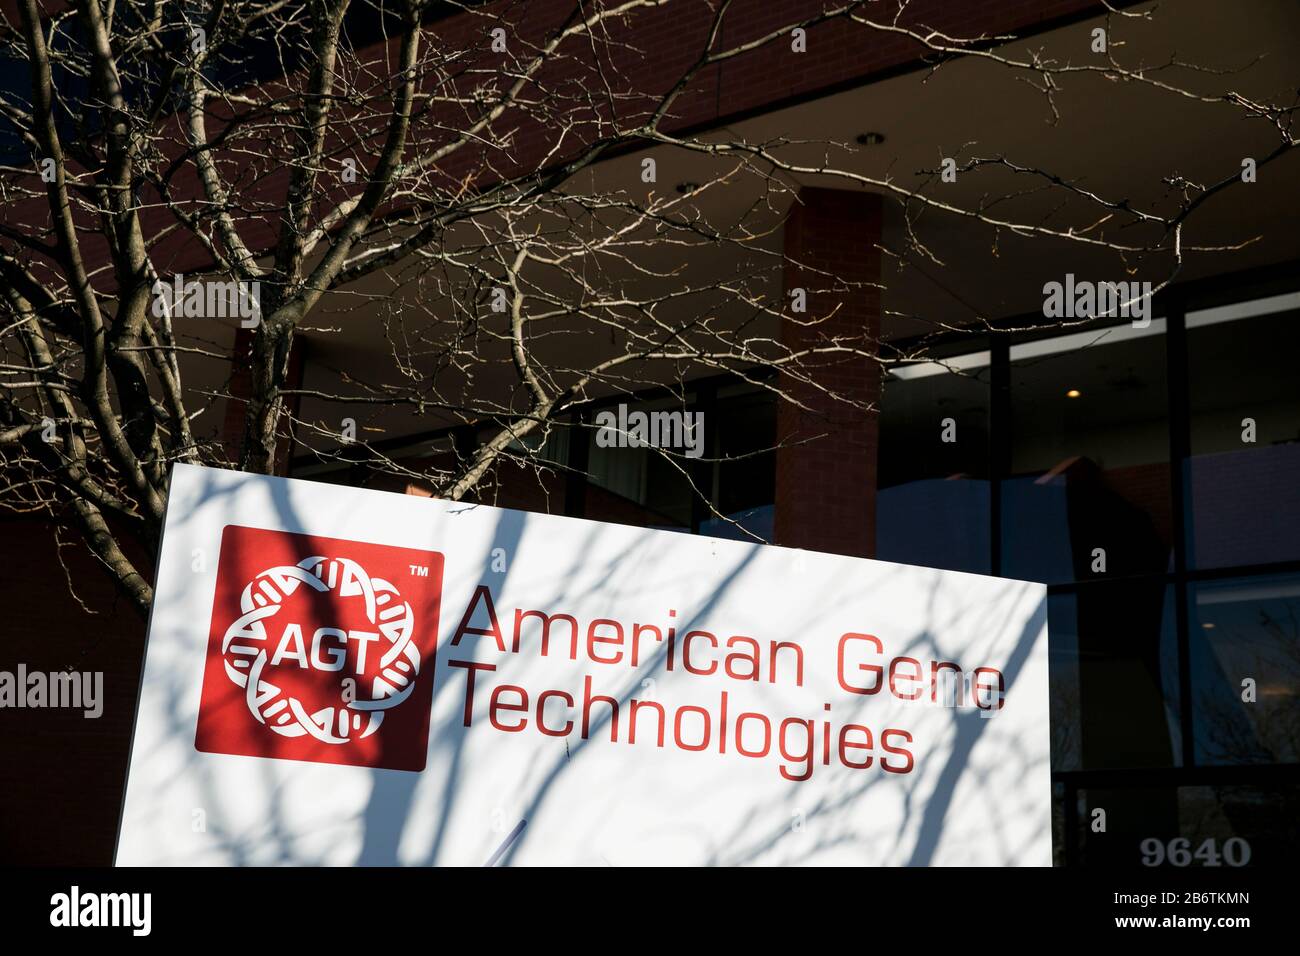 A logo sign outside of the headquarters of American Gene Technologies in Rockville, Maryland on March 8, 2020. Stock Photo